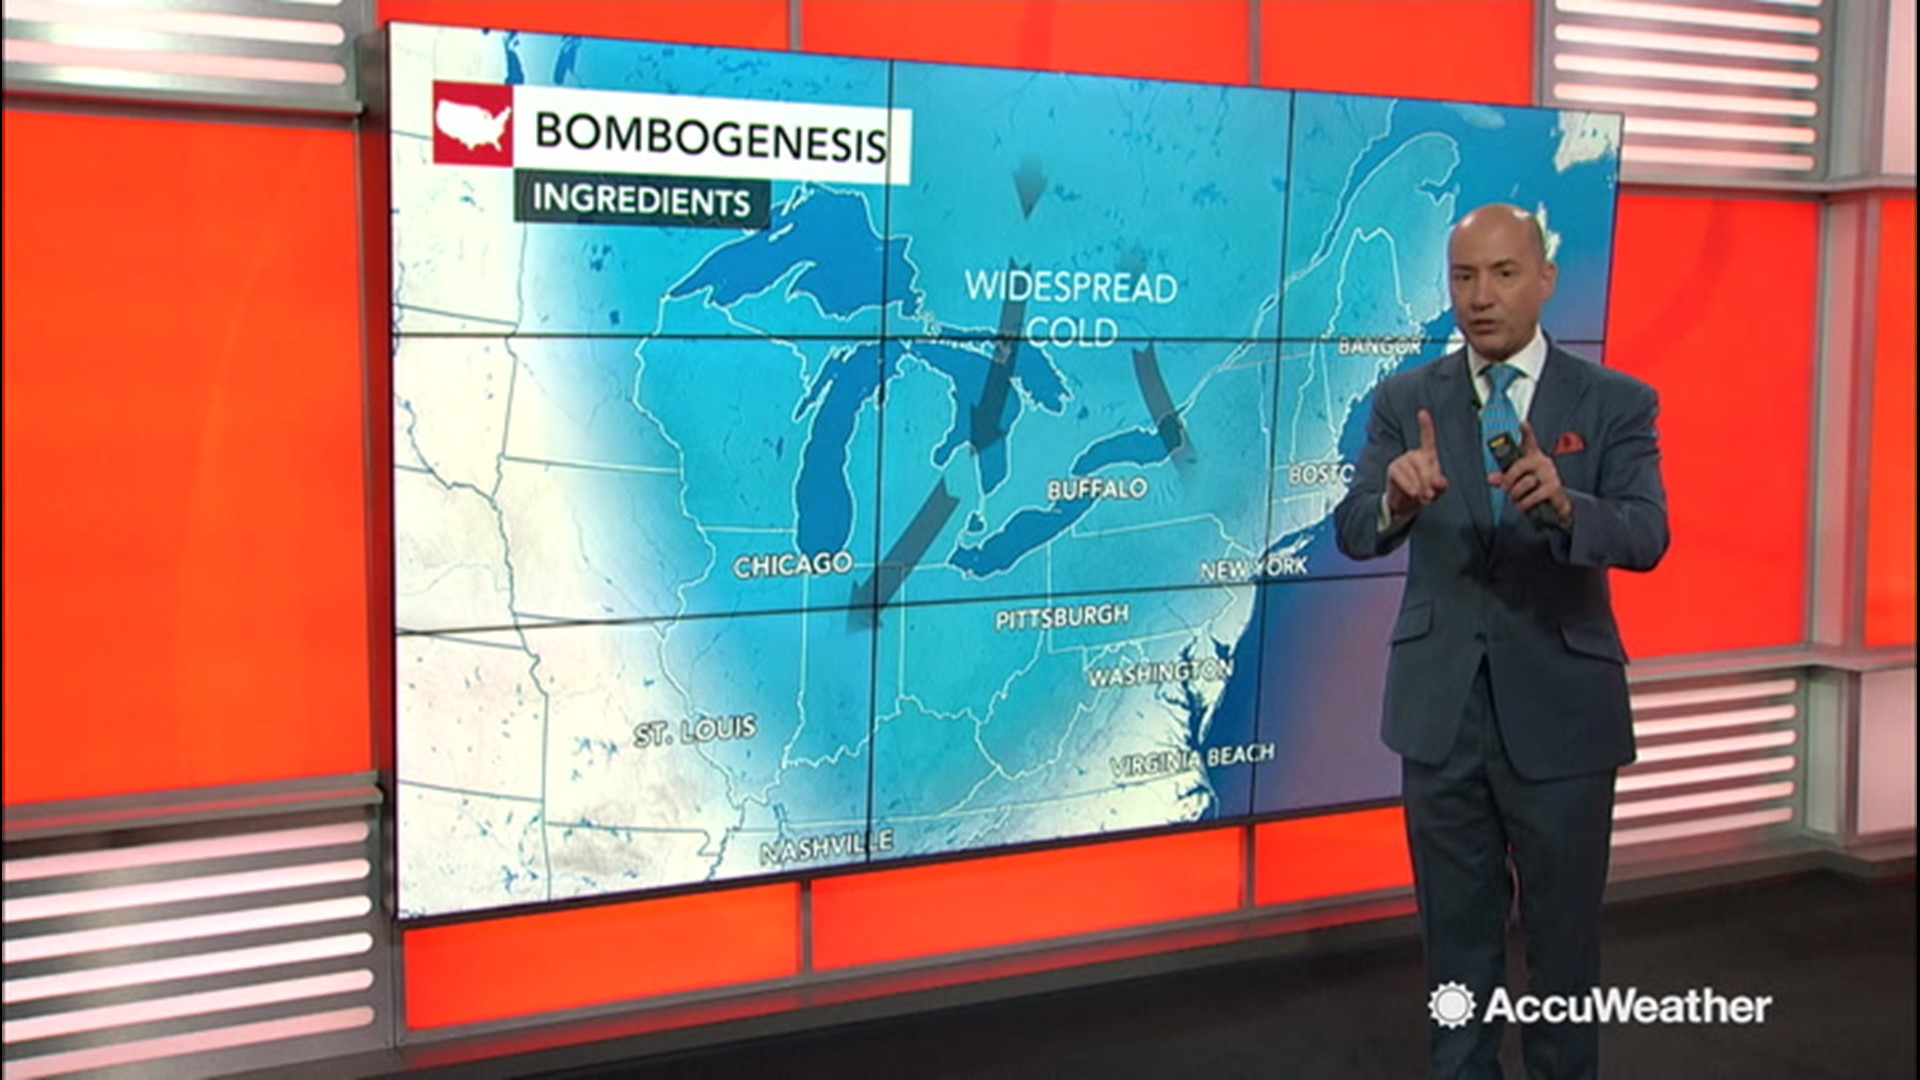 You may have heard of a storm undergoing 'bombogenesis'. If you've also heard of the term weather bomb, they are the same phenomenon. But what exactly do they mean? AccuWeather Chief Meteorologist Bernie Rayno explains.